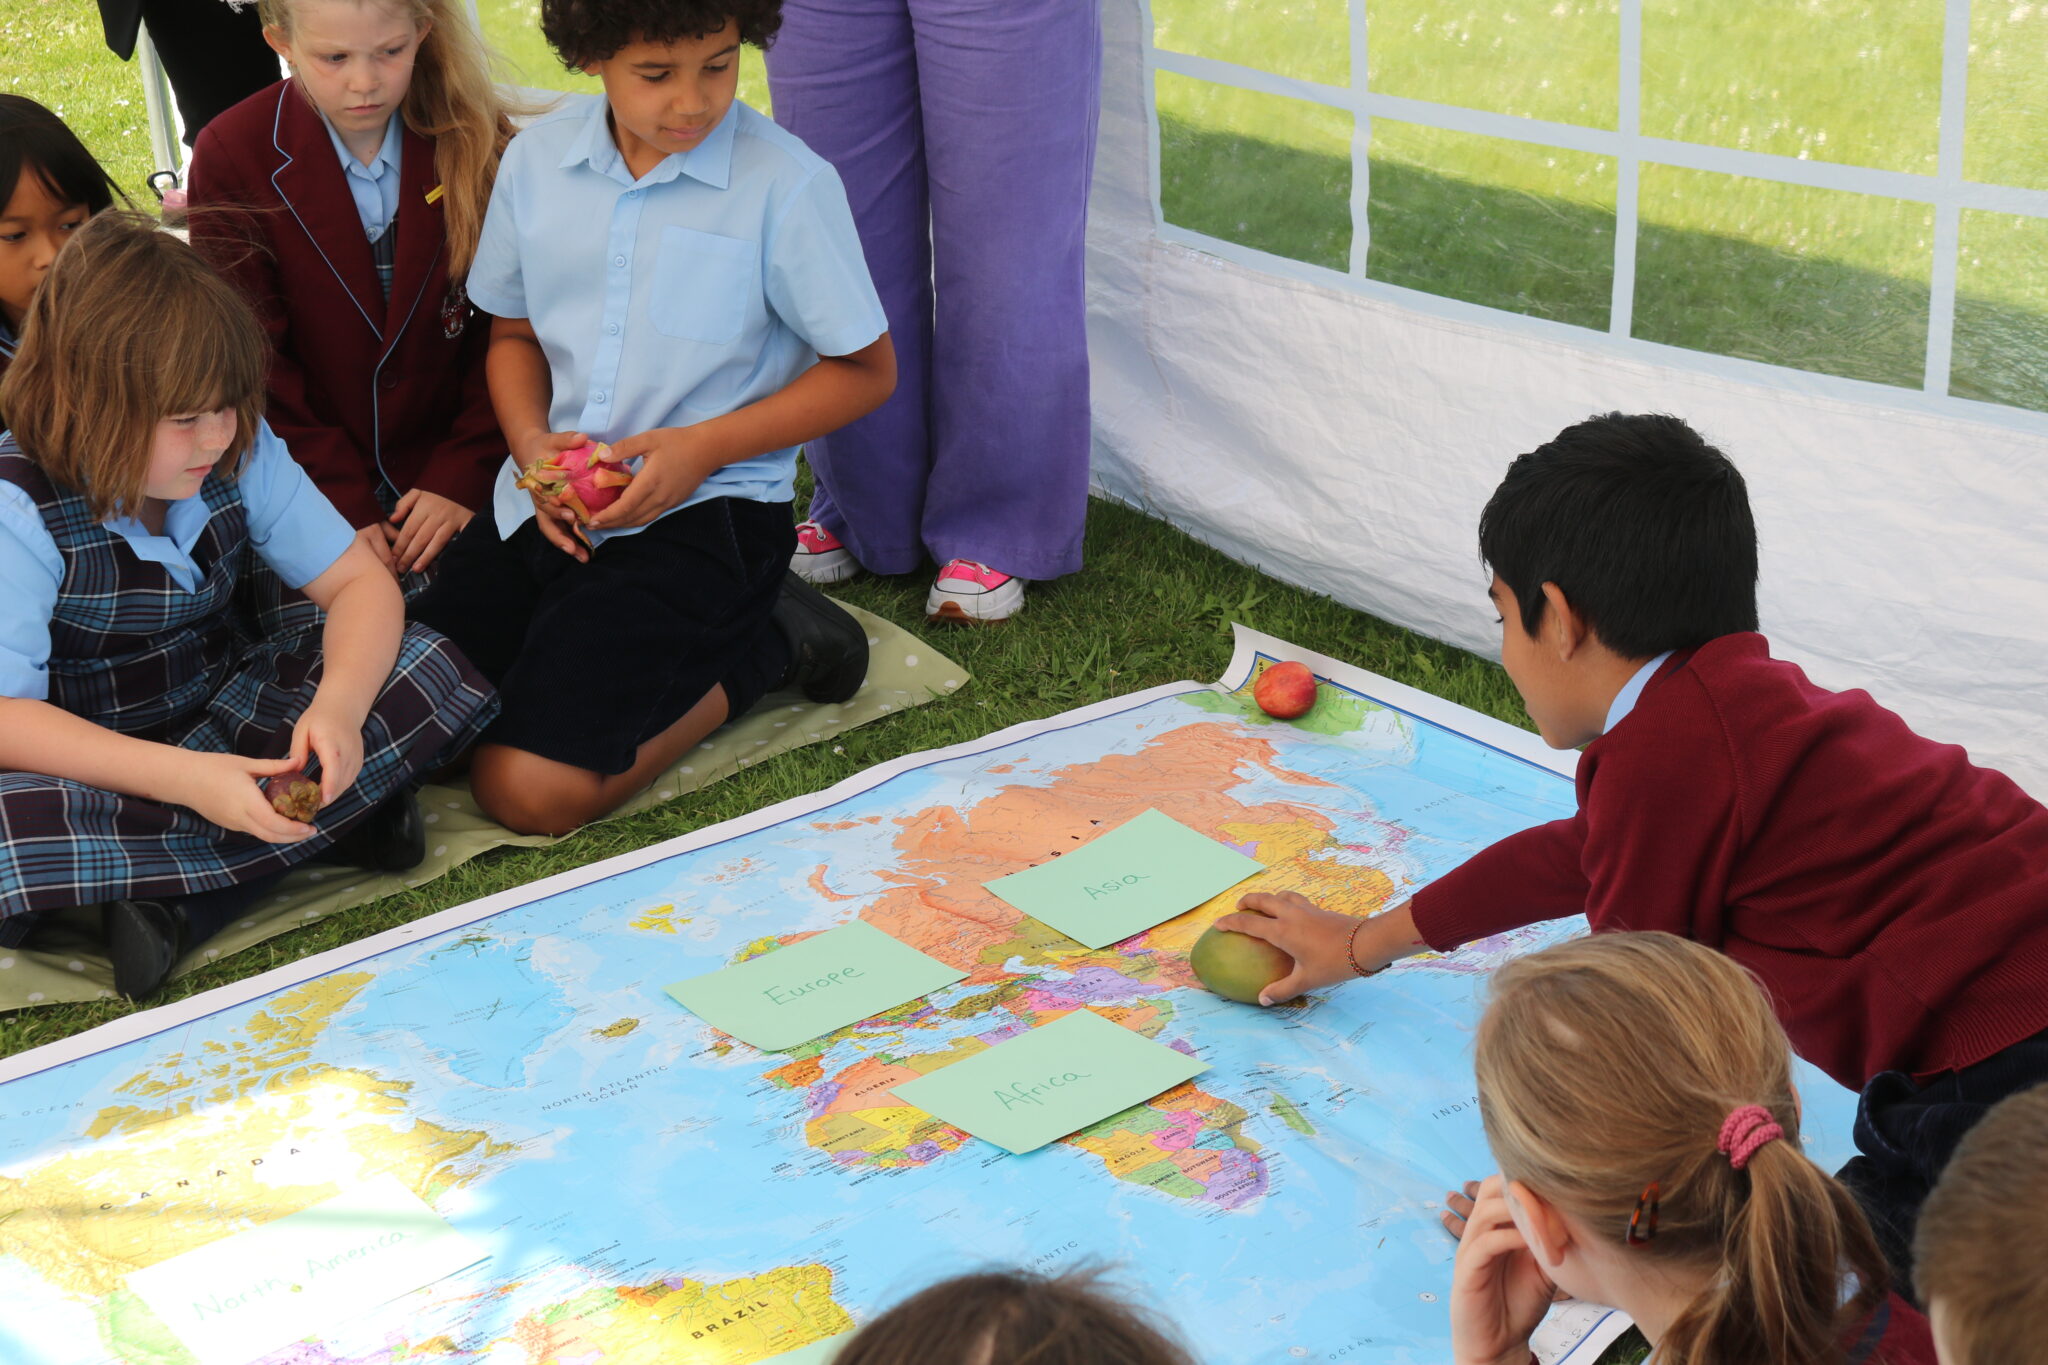 Children placing fruits on map of the world